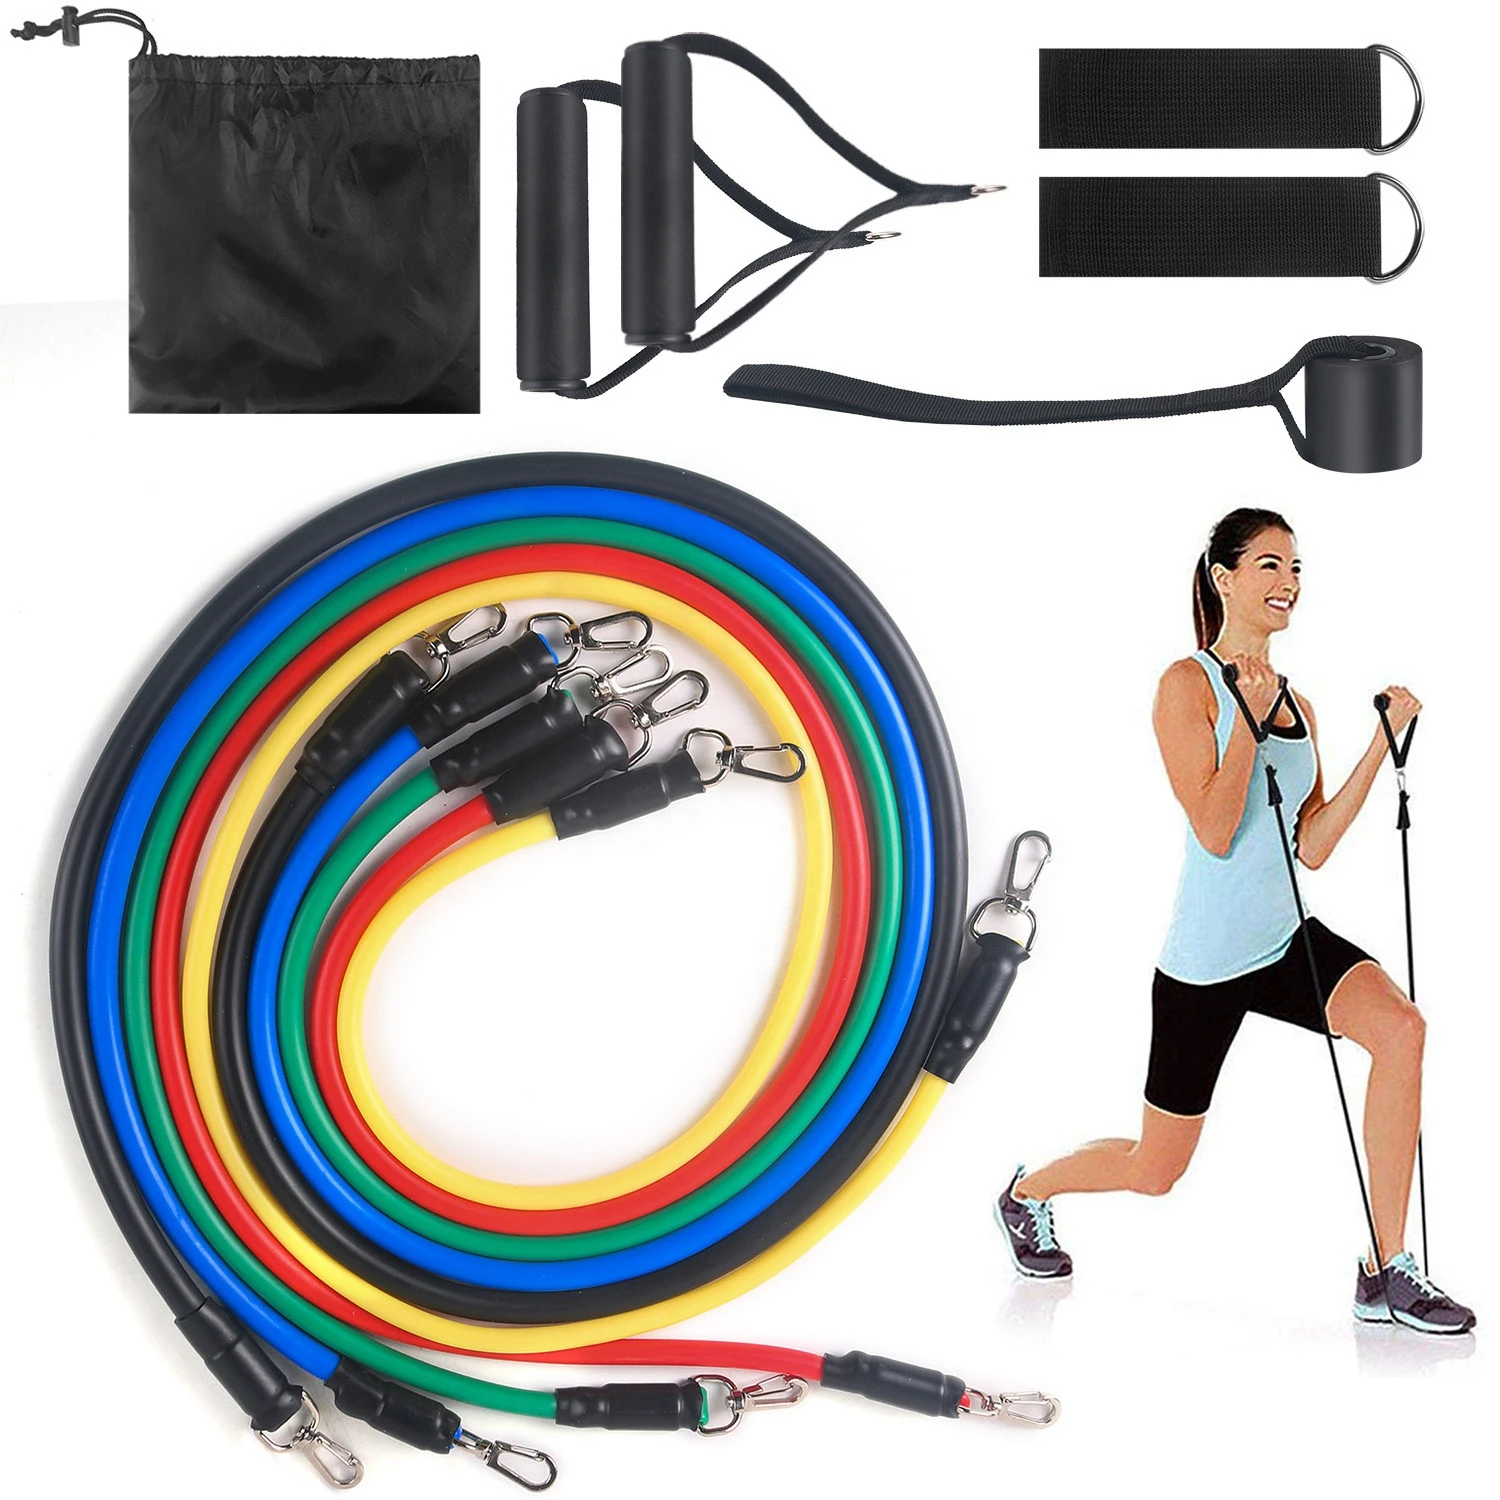 So-Easy 11pcs Resistance Bands Tube Fitness Exercise Fat Burner Booty Yoga Bands Bandas Resistencia Strength Bands Pull Rope